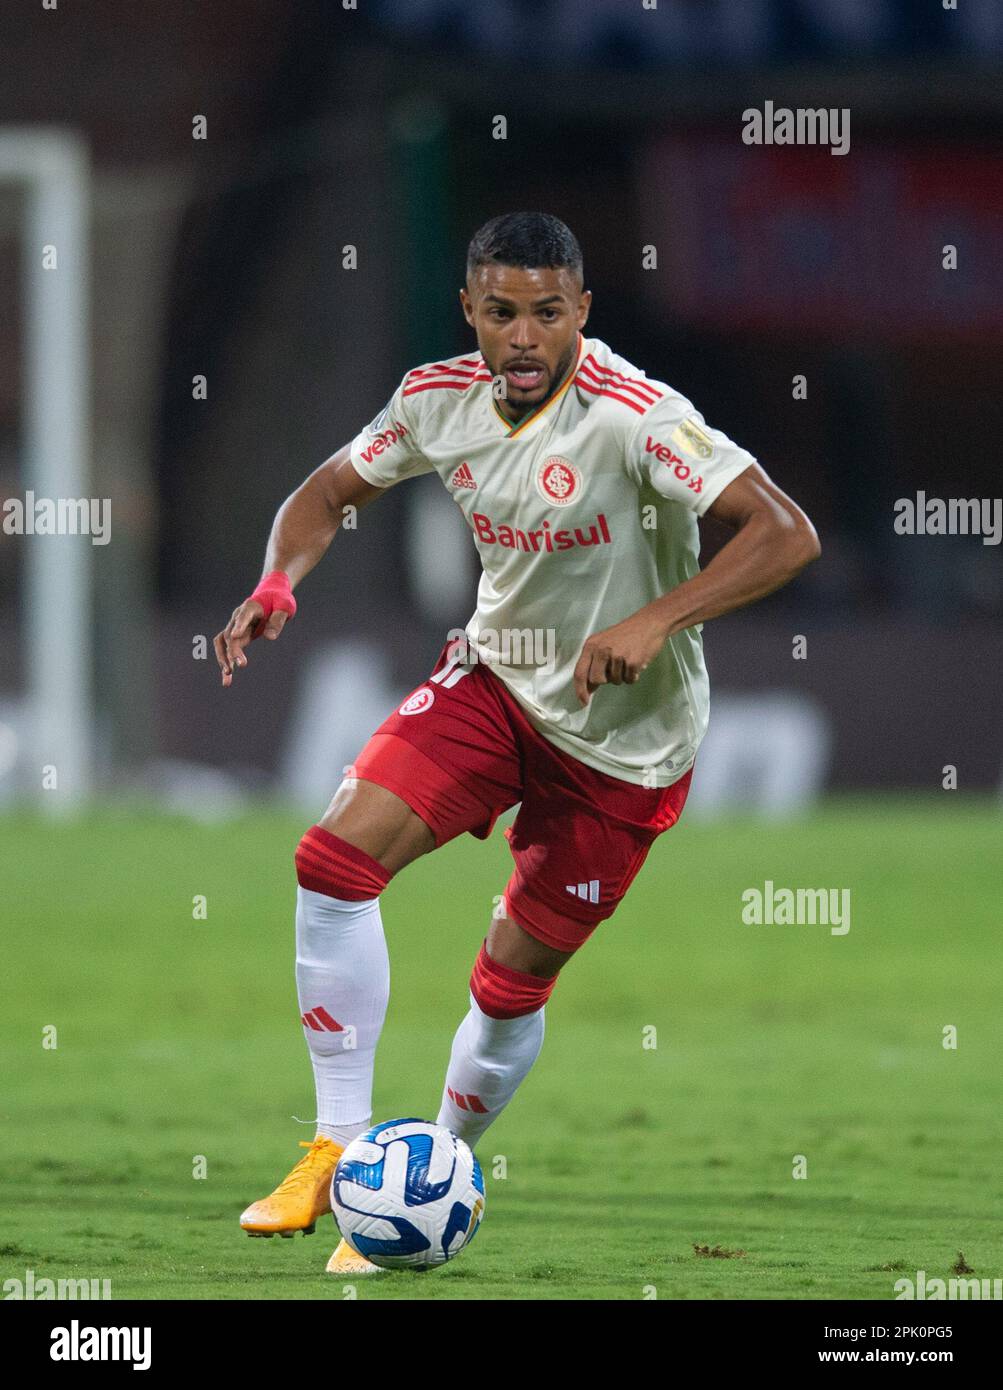 Medellin, Colombia, 04th Apr, 2023. Wanderson of Independiente Medellín, during the match between Independiente Medellín and Internacional for the 1st round of Group B of Libertadores 2023, at Atanasio Girardot, in Medellin, Colombia on April 04. Photo: Max Peixoto/DiaEsportivo/DiaEsportivo/Alamy Live News Stock Photo